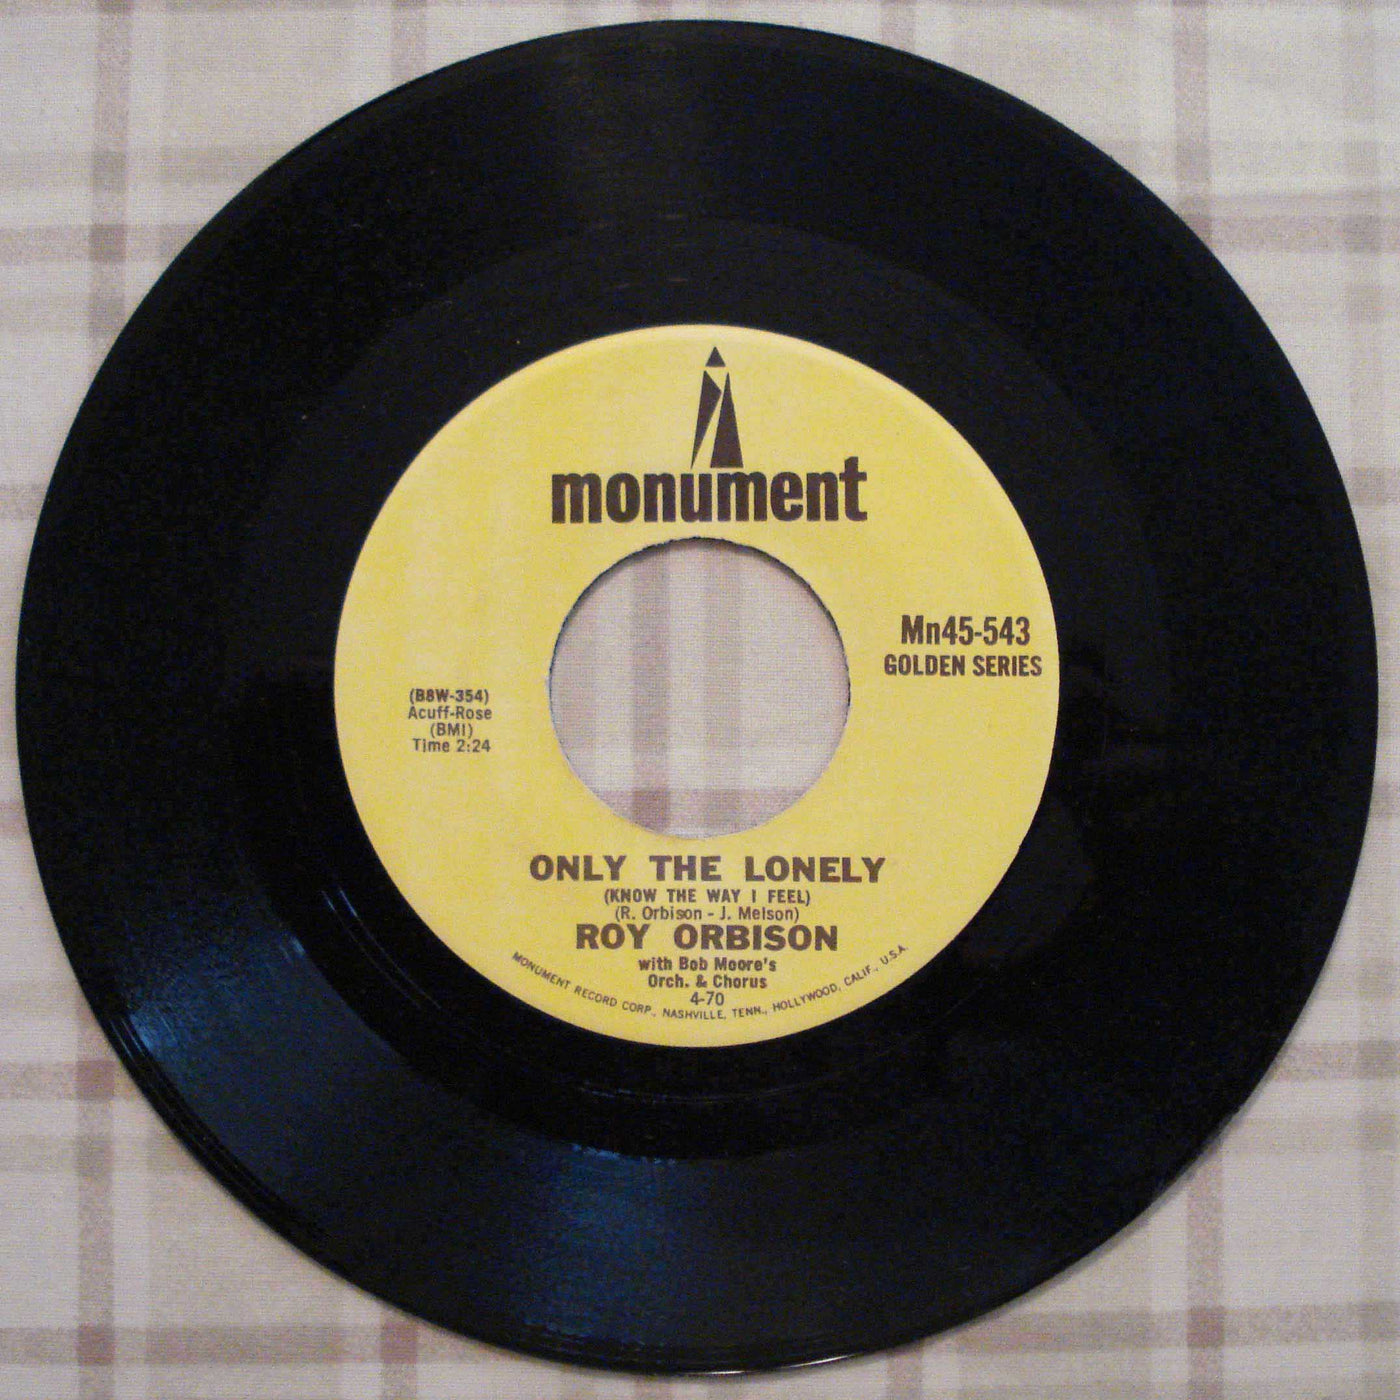 Roy Orbison - Only The Lonely-Up Town (1960) Vinyl Single 45rpm Mn45-543